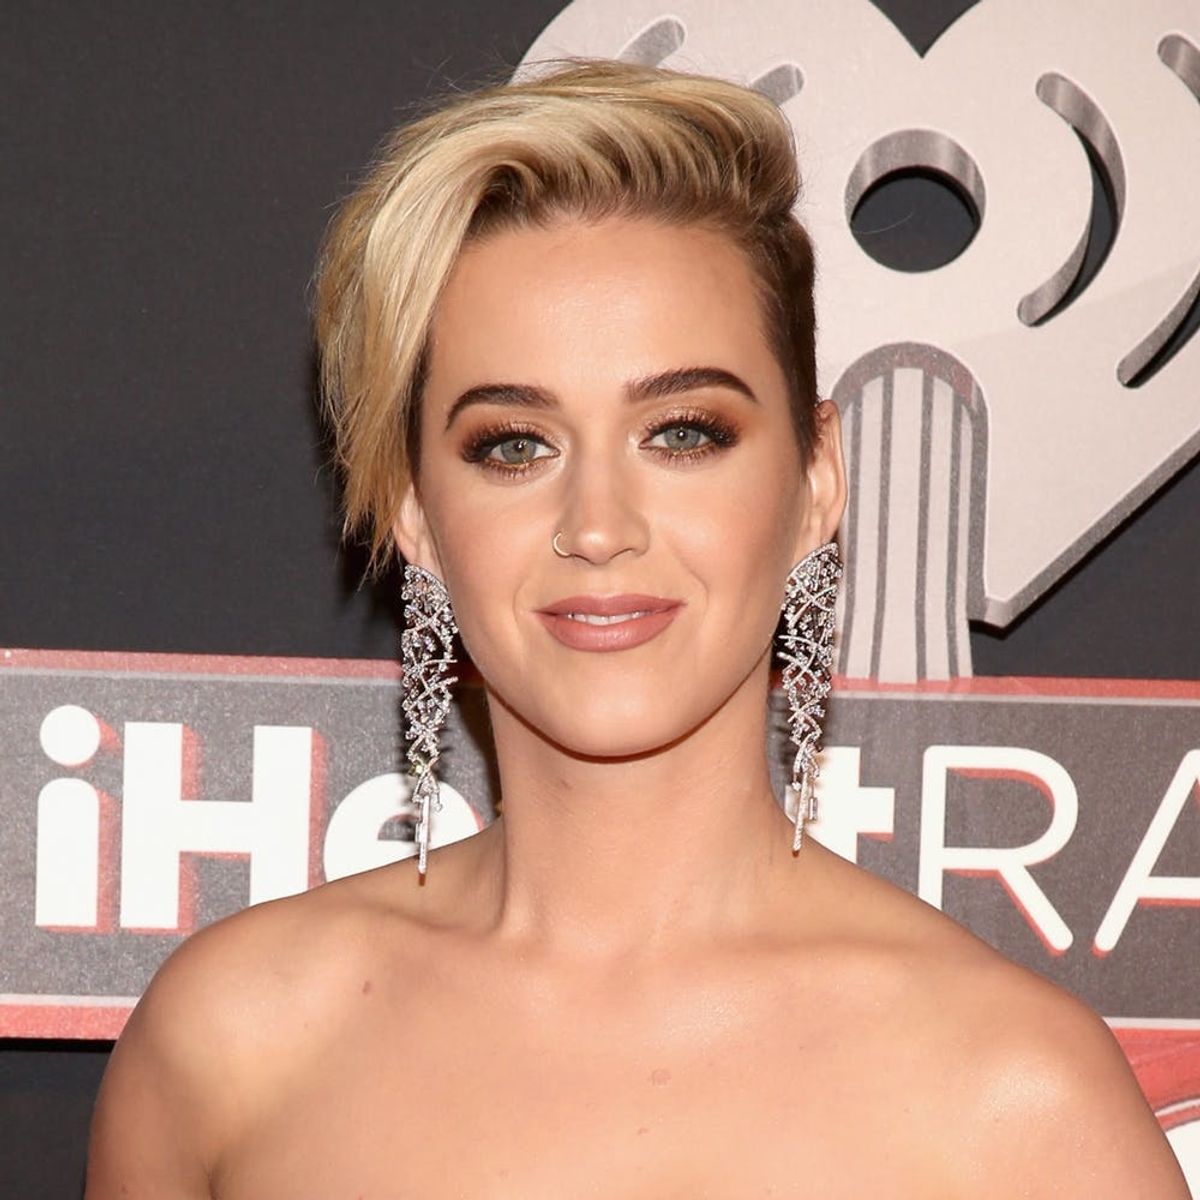 Katy Perry Just Went Shorter and Blonder Than Ever Before